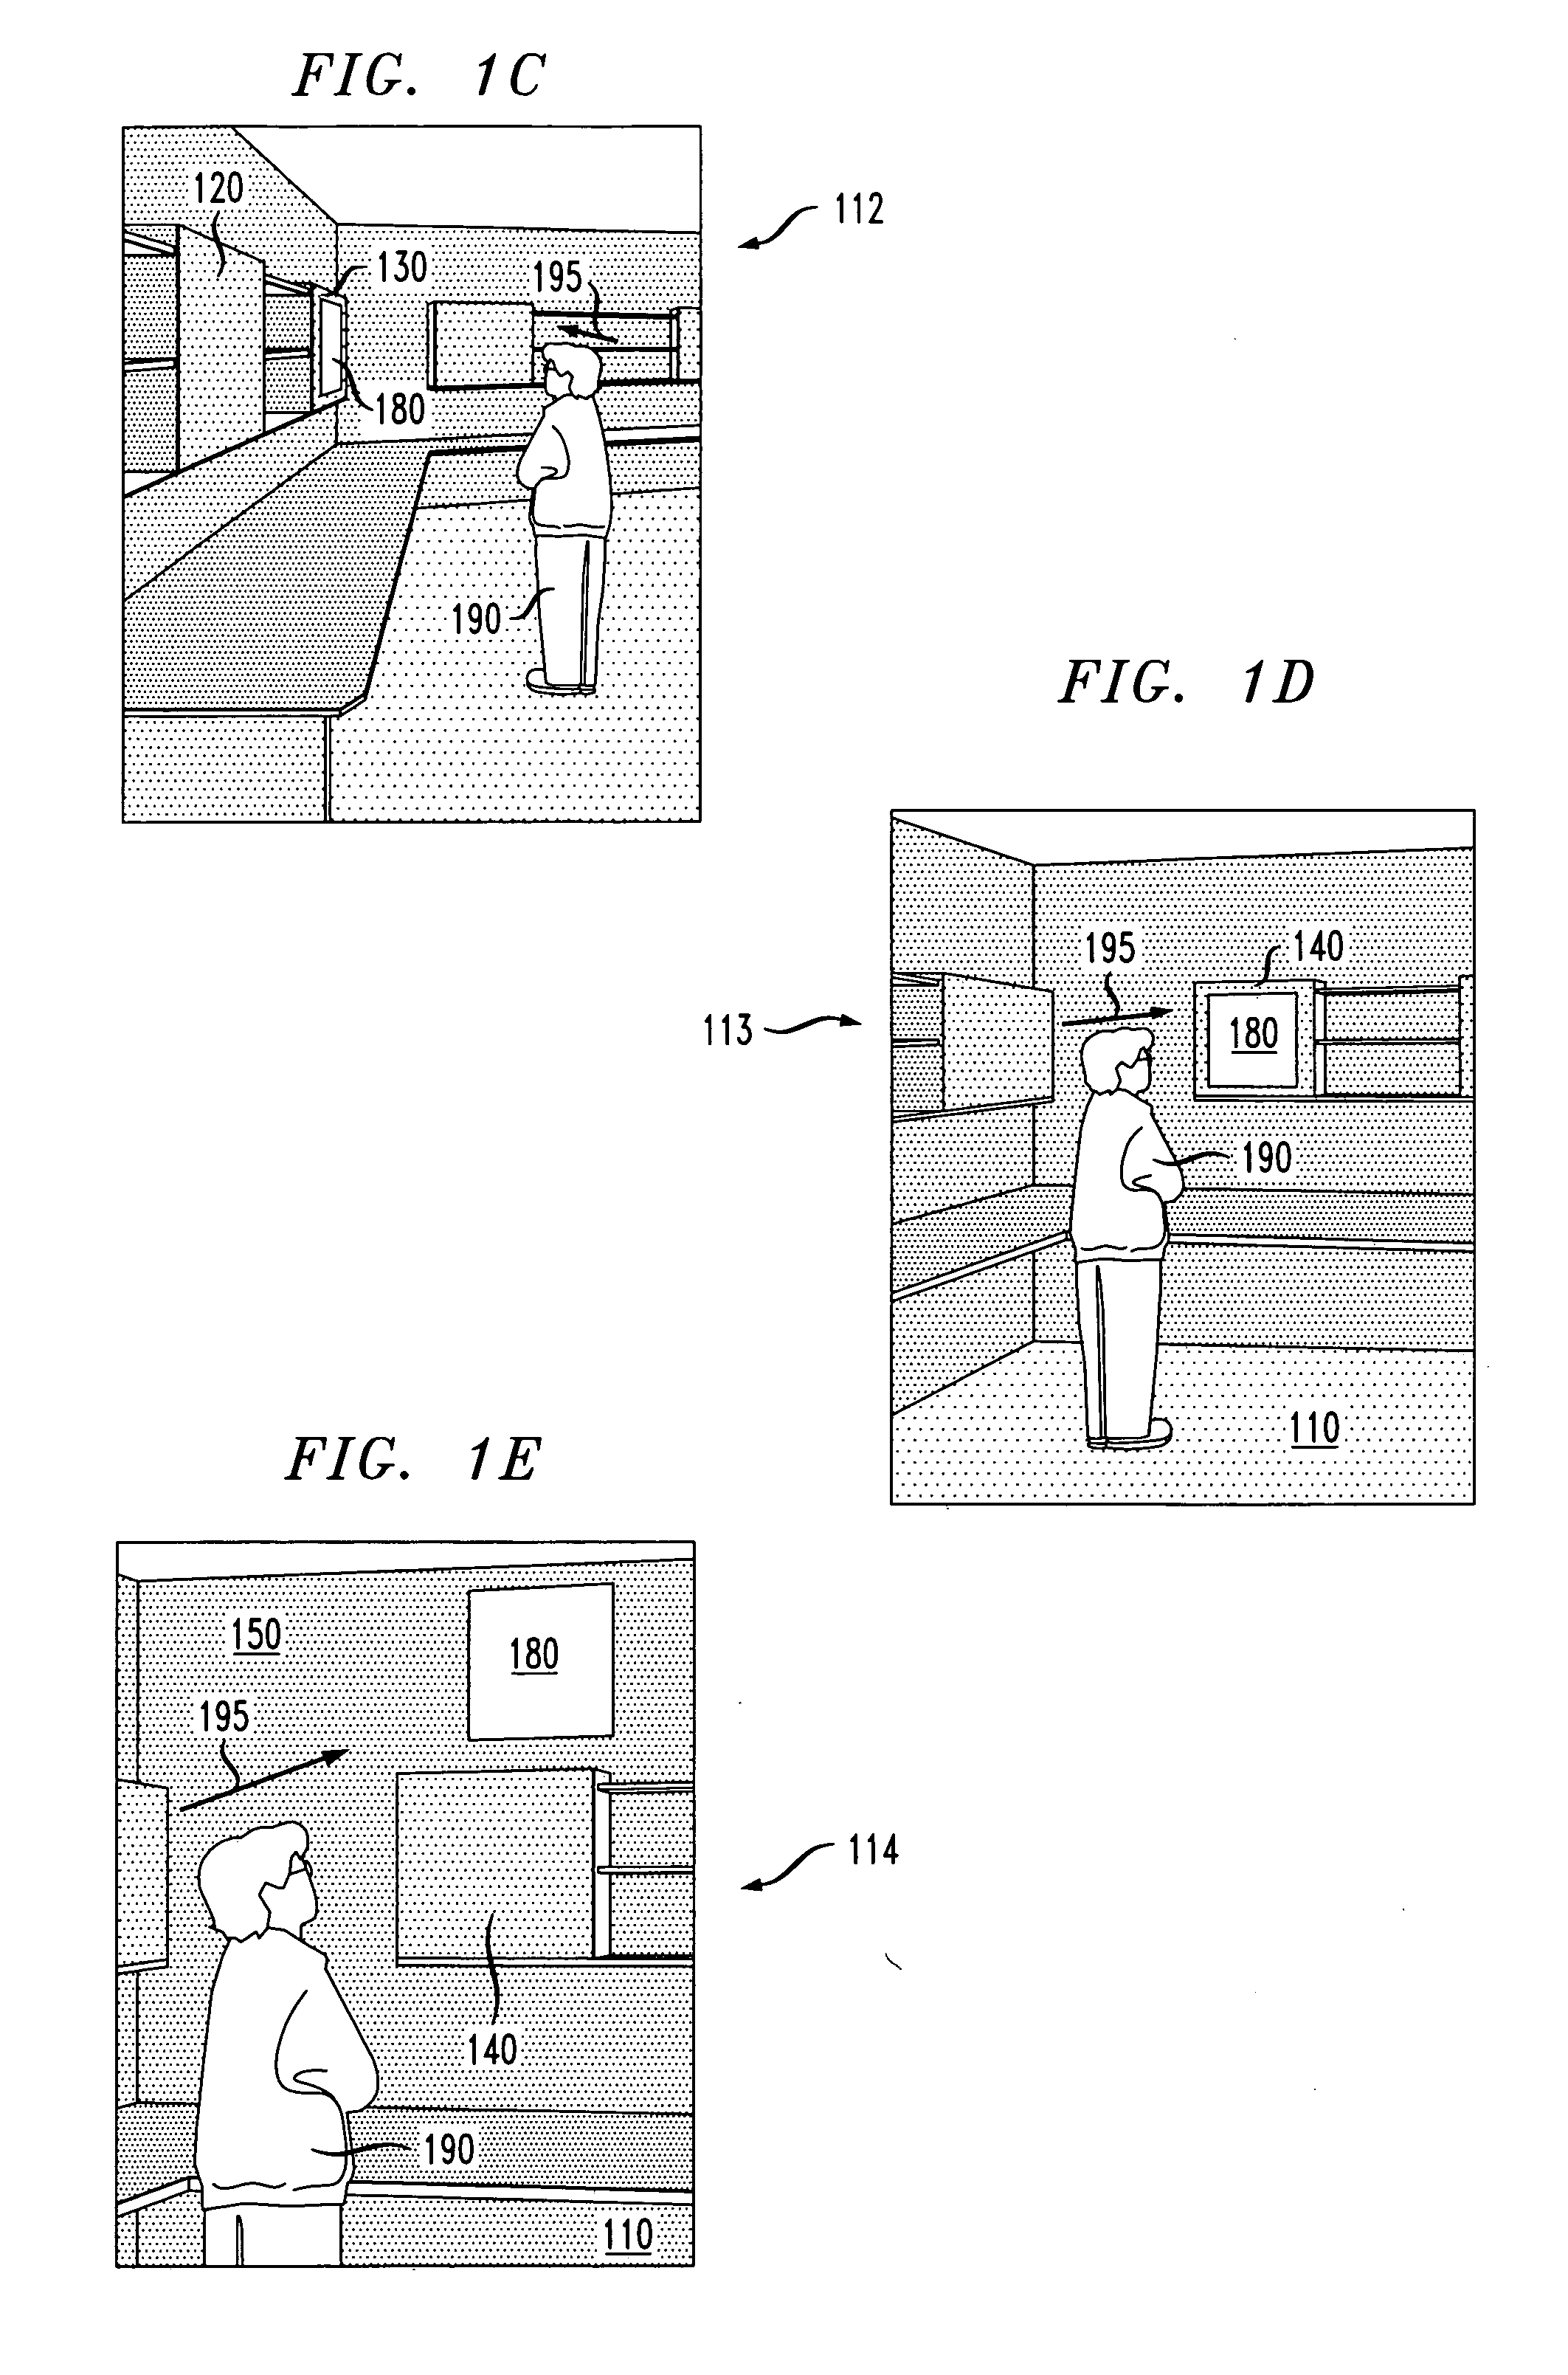 Method and system for a user-following interface